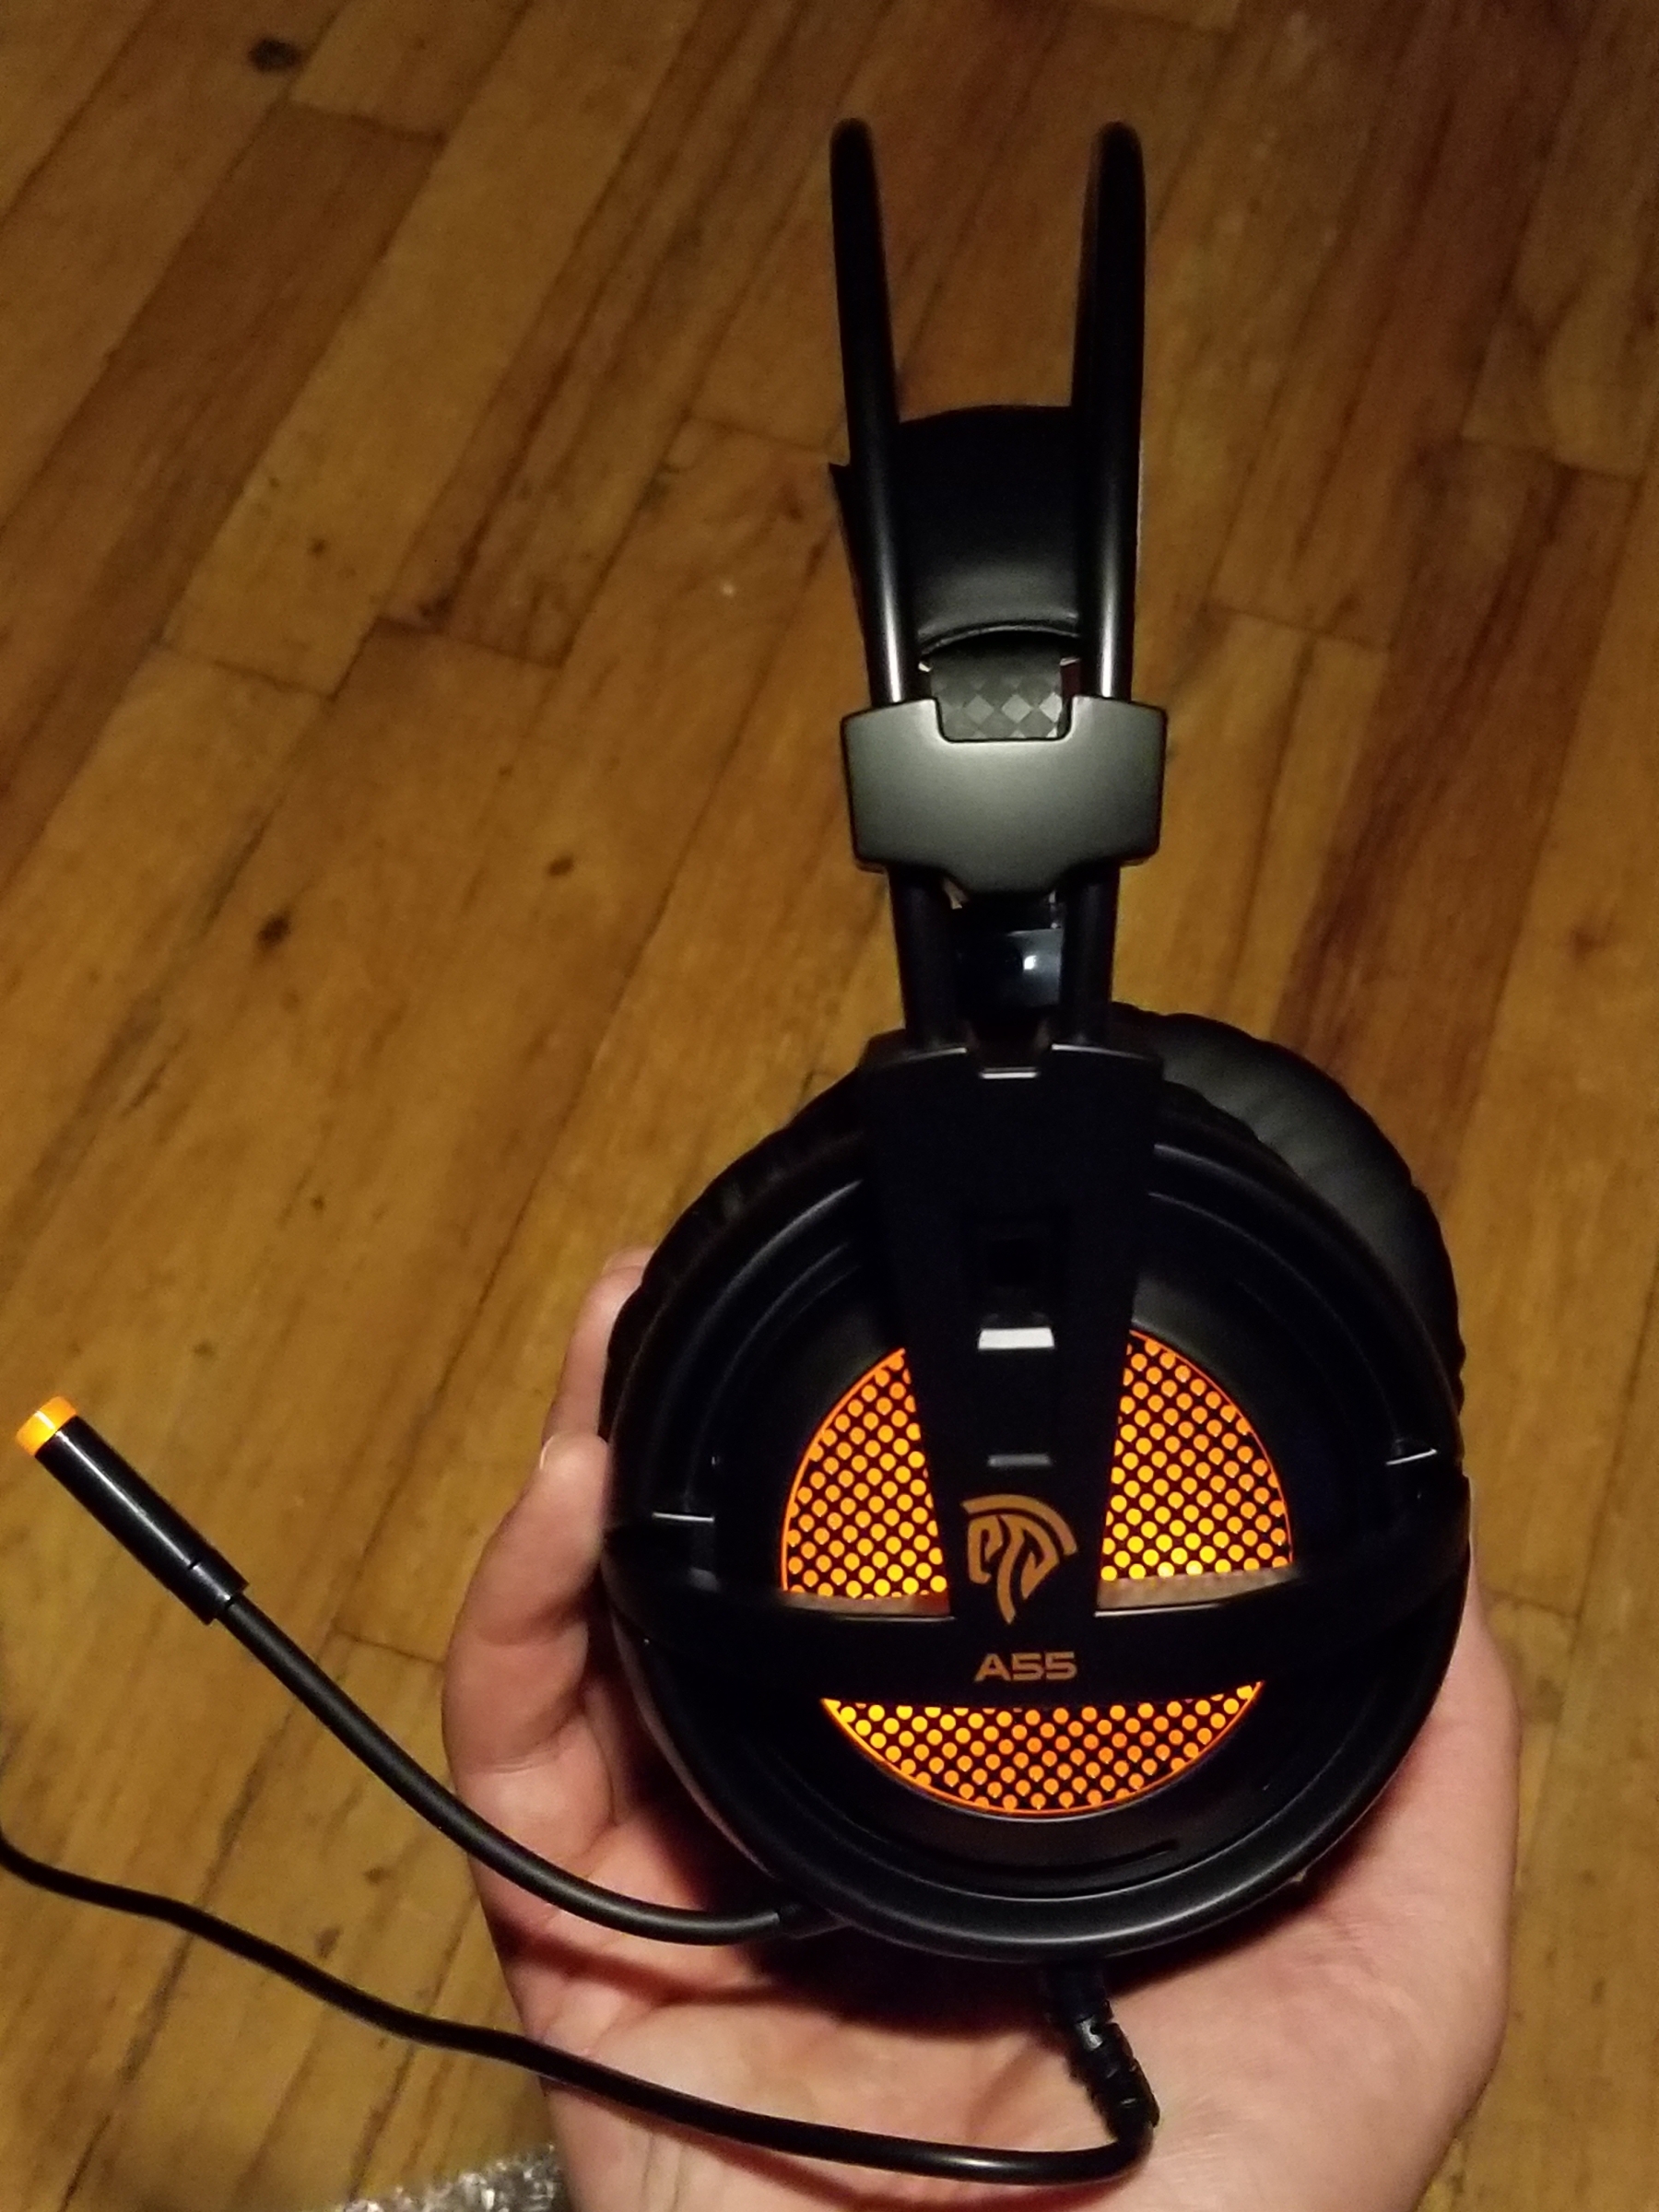 Overall, Good headset for the price with good sound quality that is much closer to my expensive headset. (November 29, 2017)